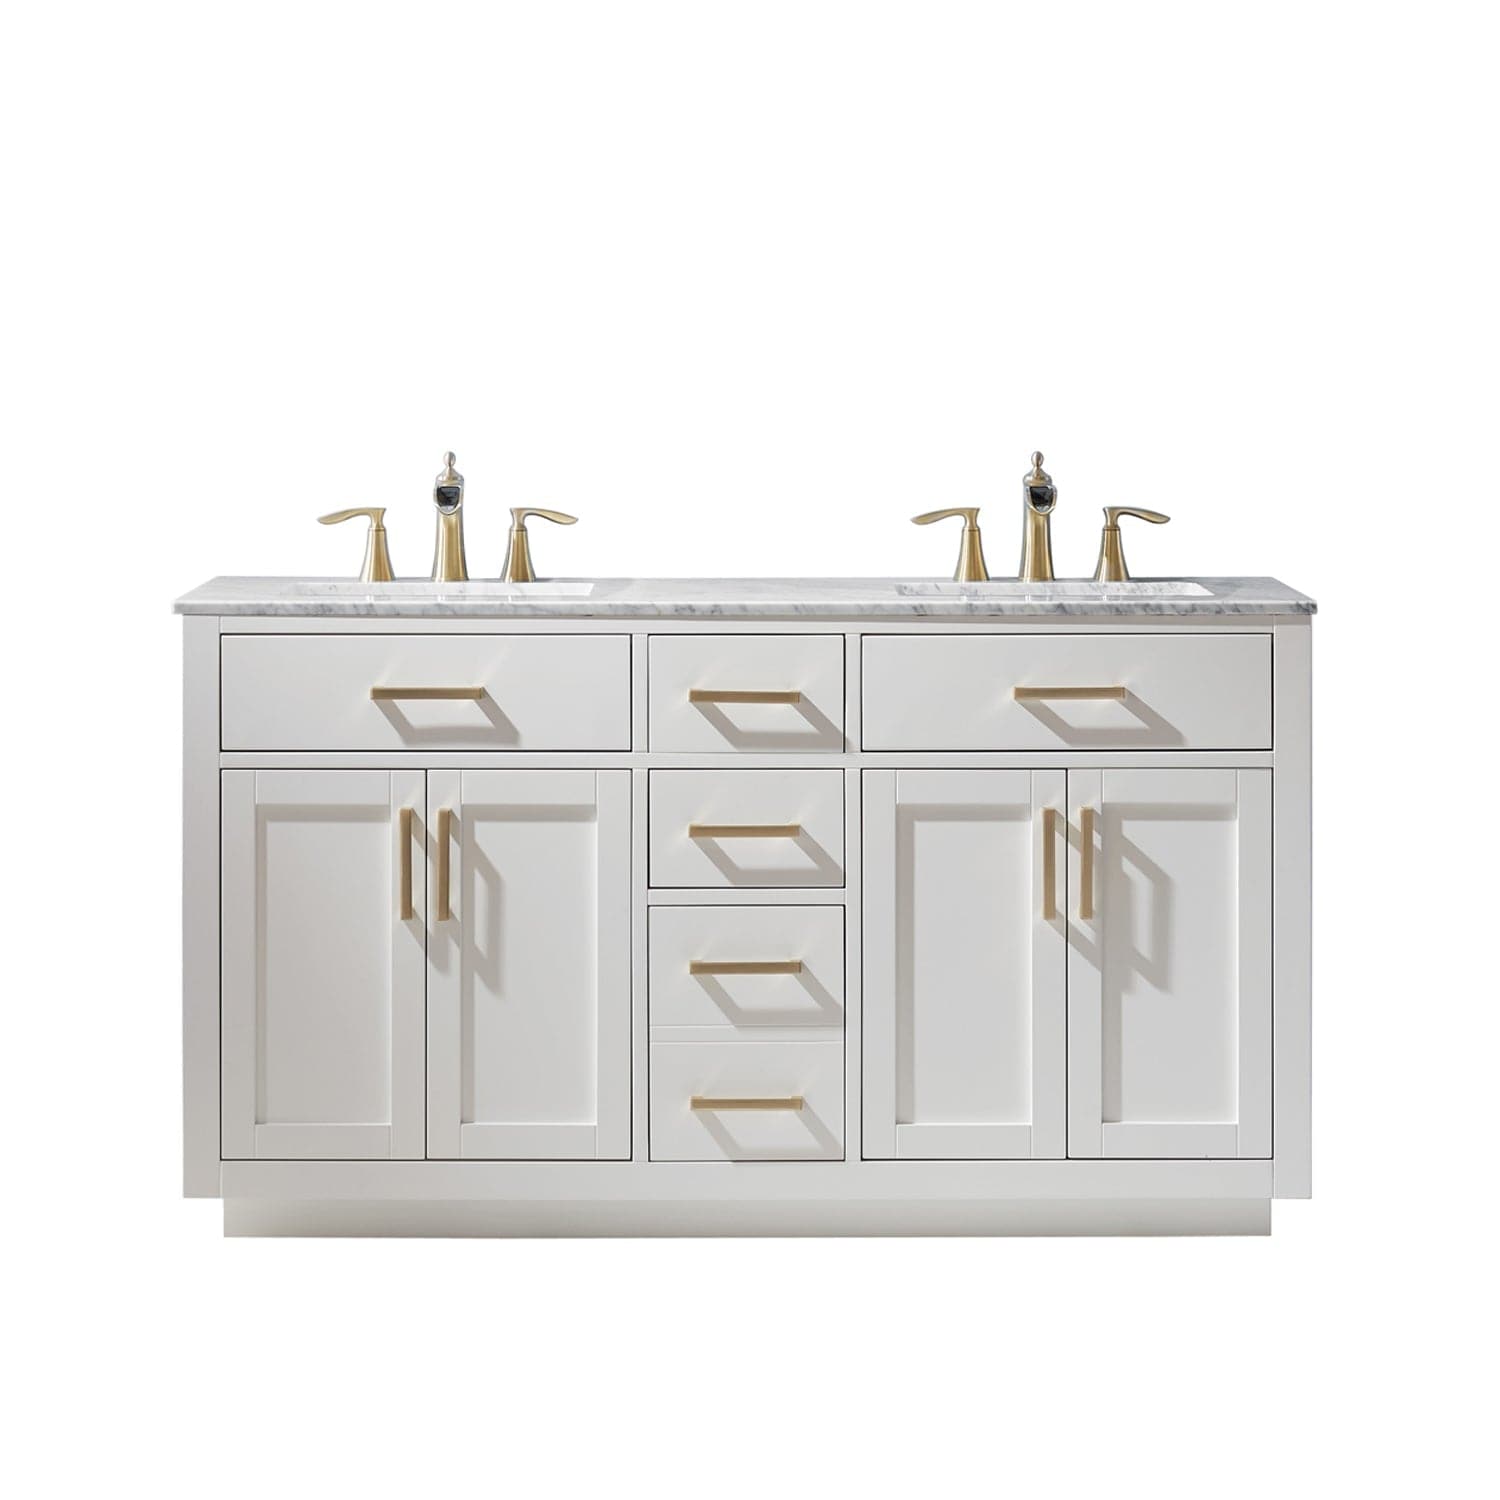 Altair Ivy 60" Double Bathroom Vanity Set in White and Carrara White Marble Countertop without Mirror 531060-WH-CA-NM - Molaix631112971263Vanity531060-WH-CA-NM